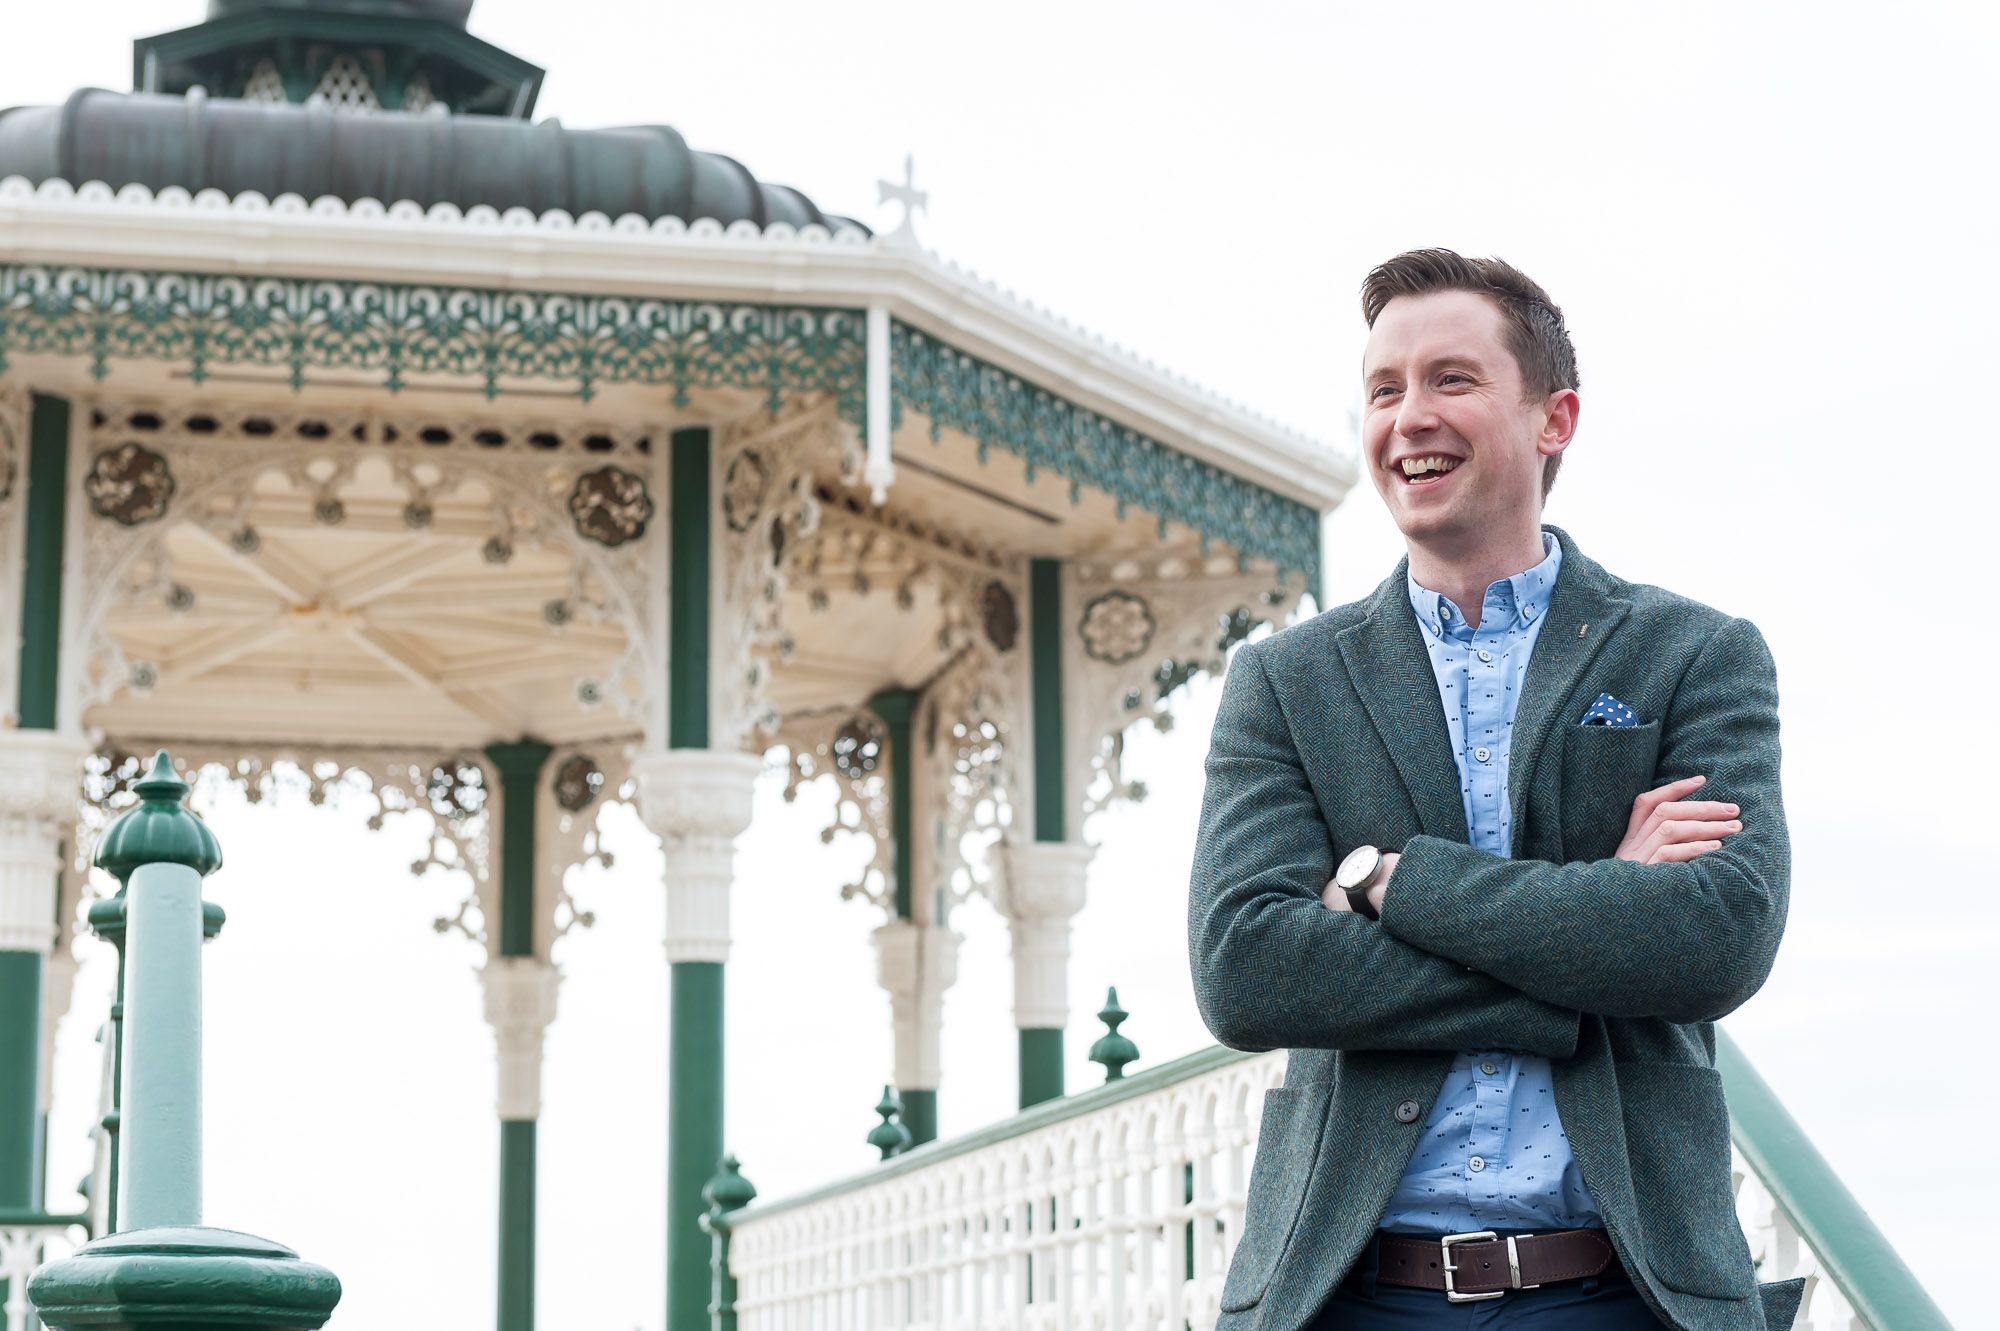 James Dempster standing in front of the bandstand in Brighton & Hove